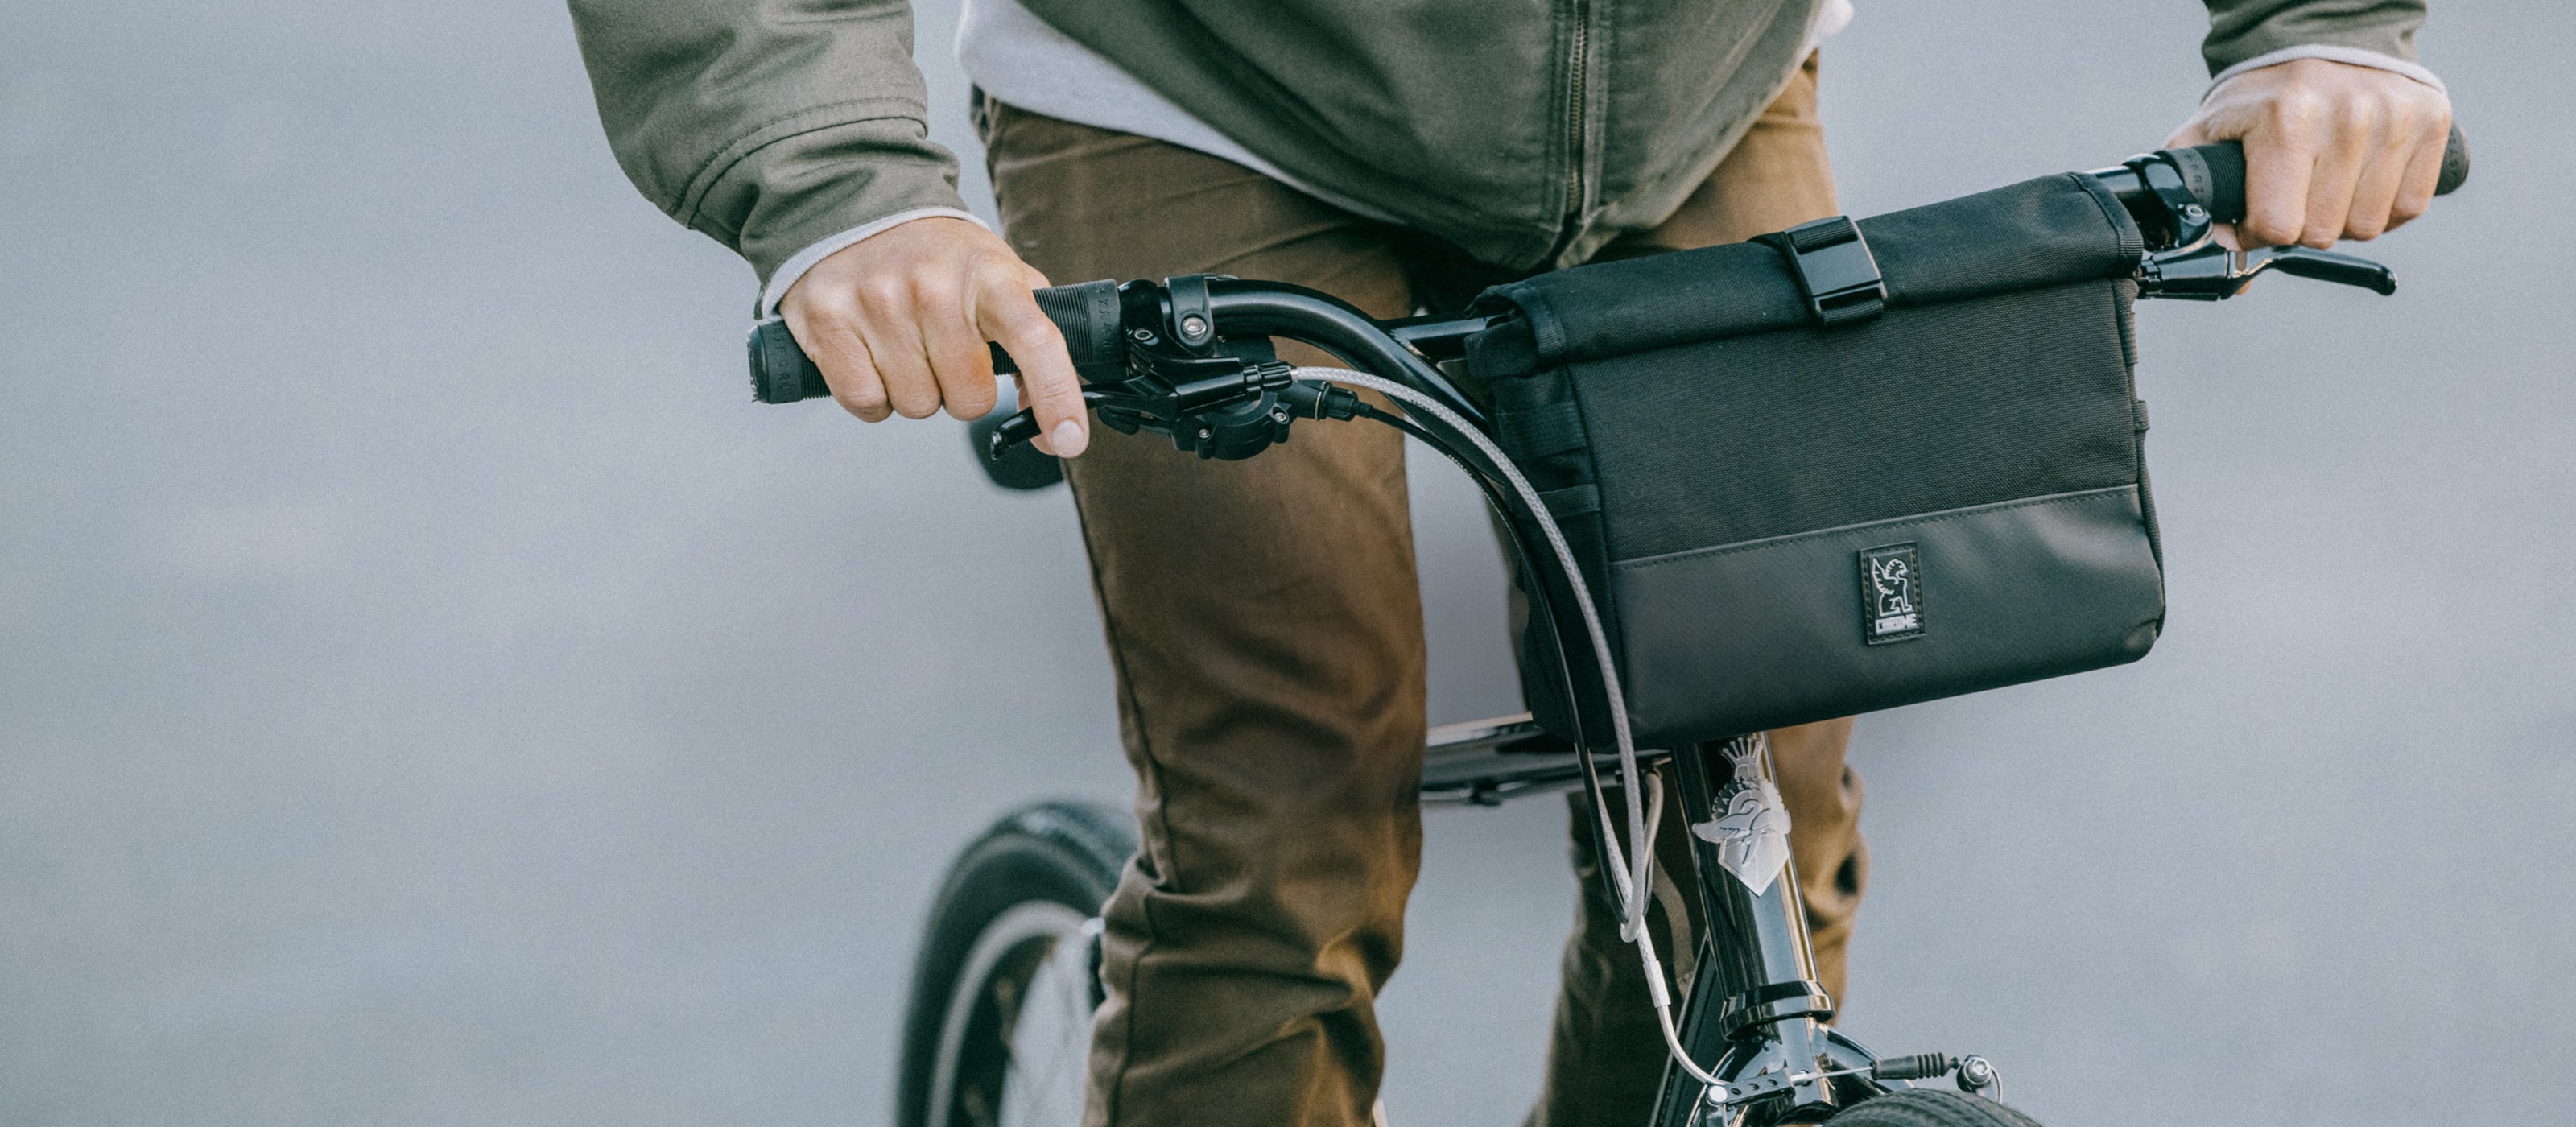 Doubletrack Handlebar Bag on a bike with a guy riding it in a desktop size image